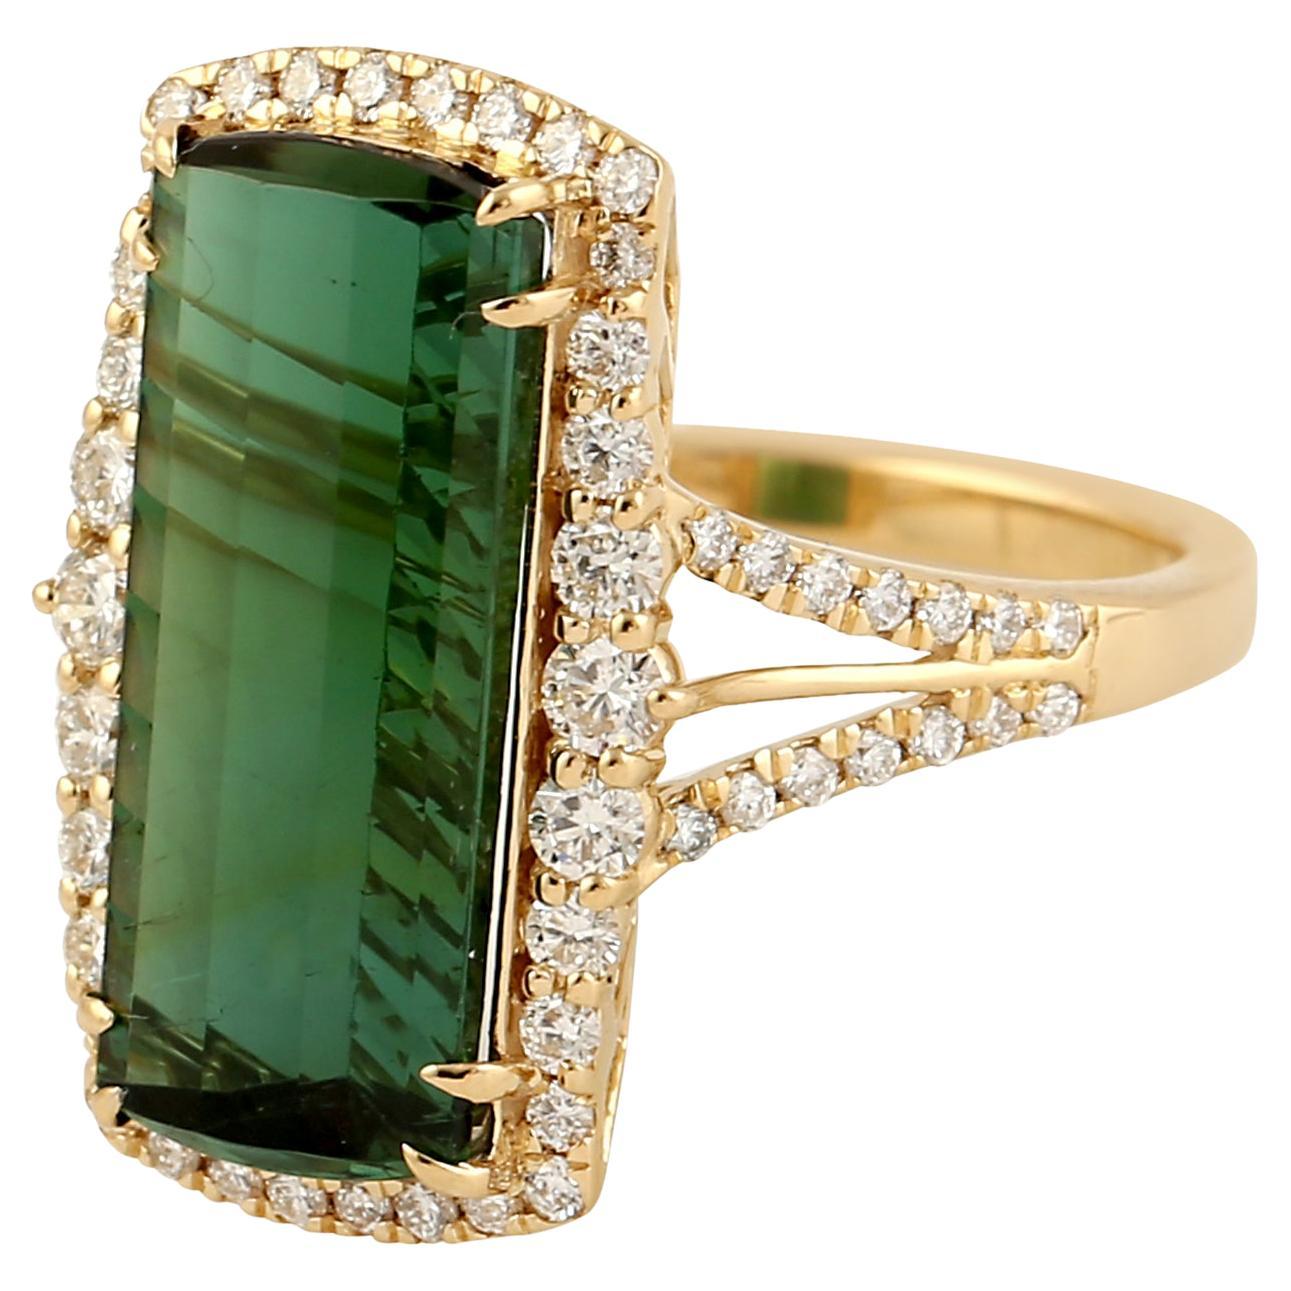 Green Tourmaline Cocktail Ring With Pave Diamonds Made In 18k yellow Gold For Sale